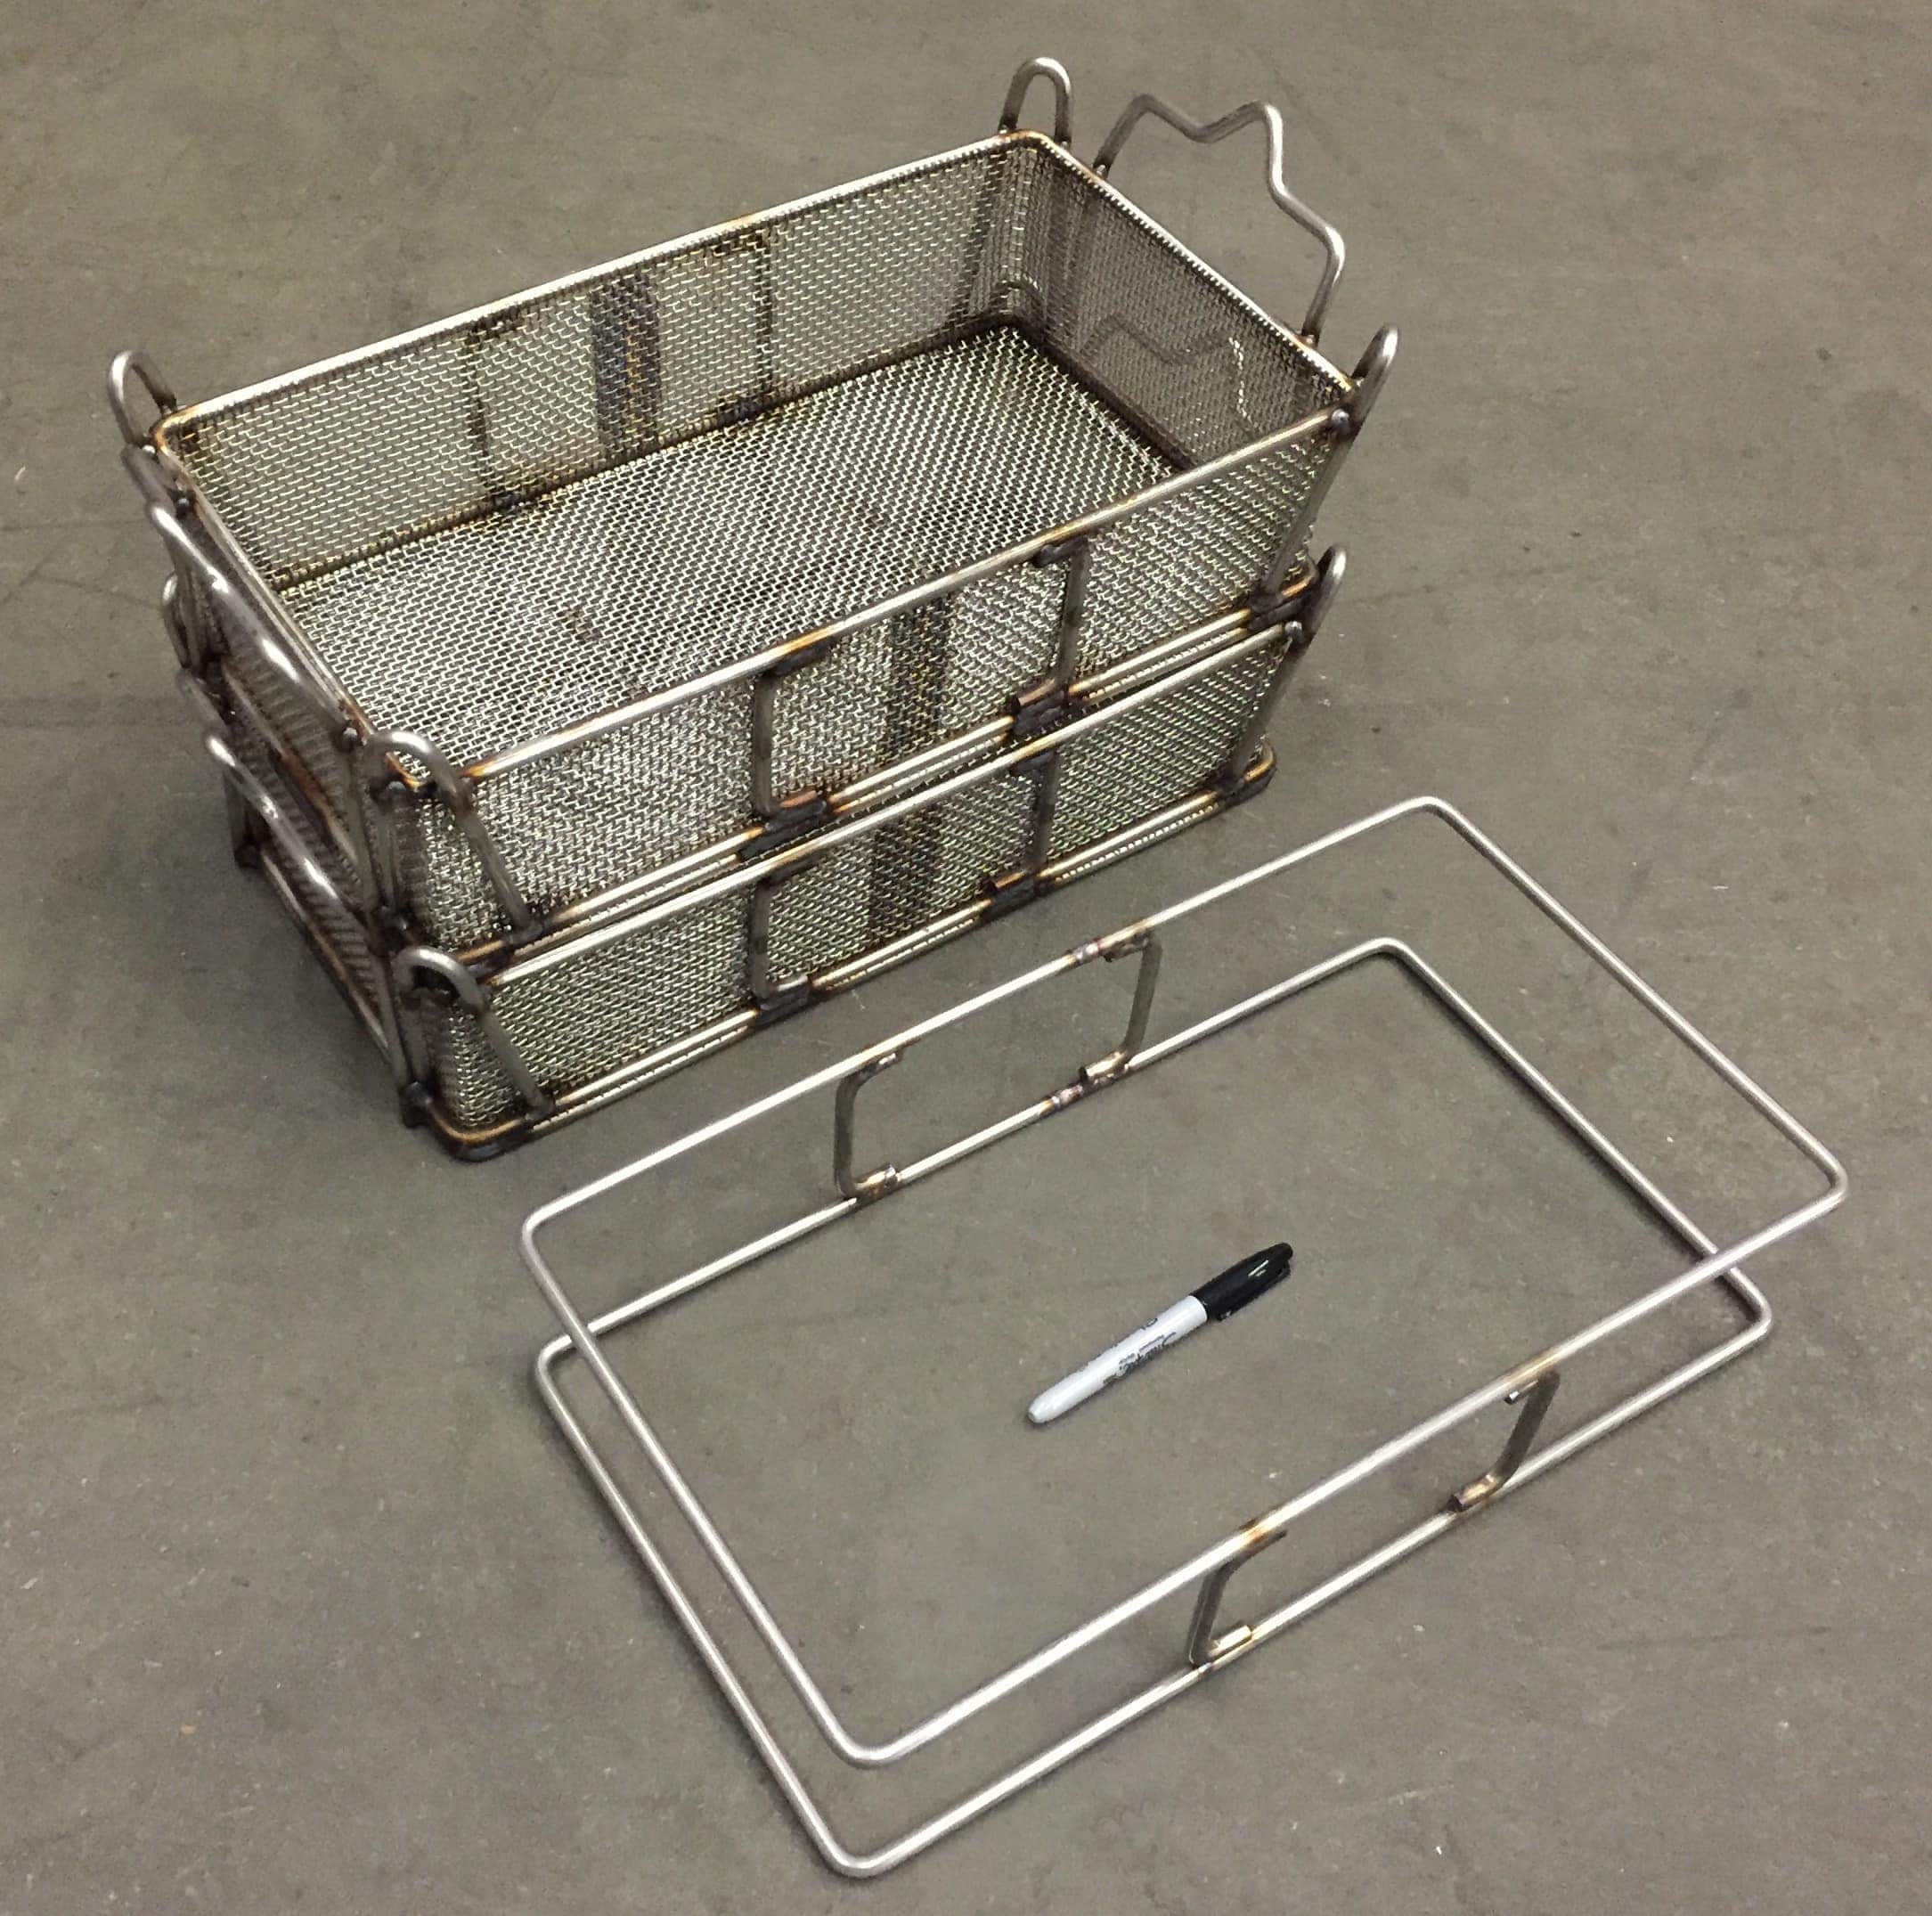 Two stackable wire baskets and an unfinished frame